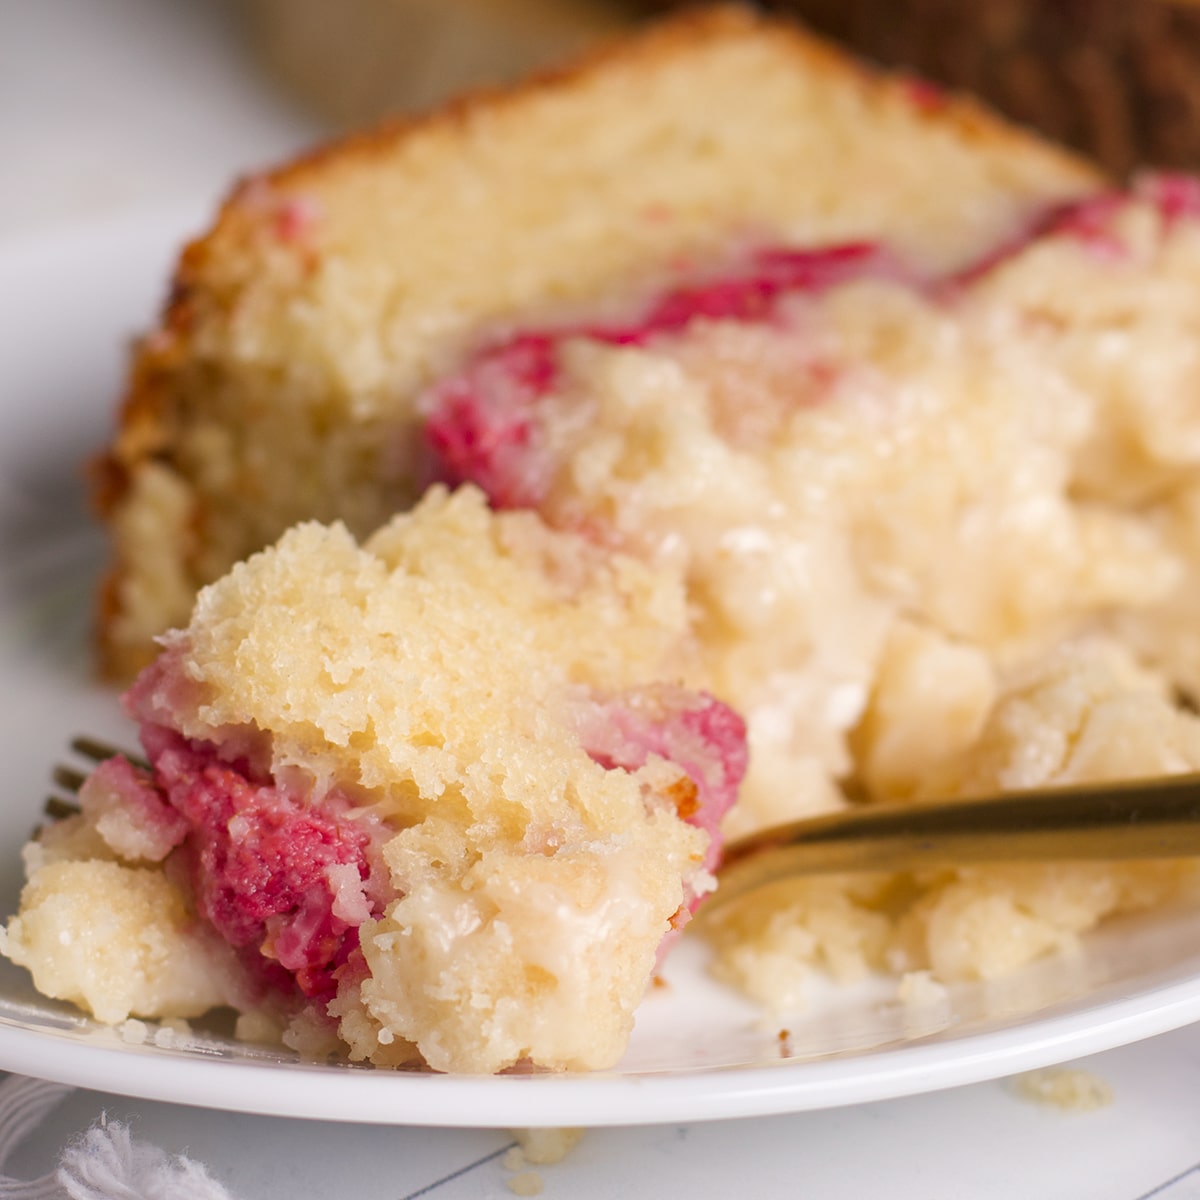 Someone using a fork to cut a bite of raspberry bread from a slice on a white plate.